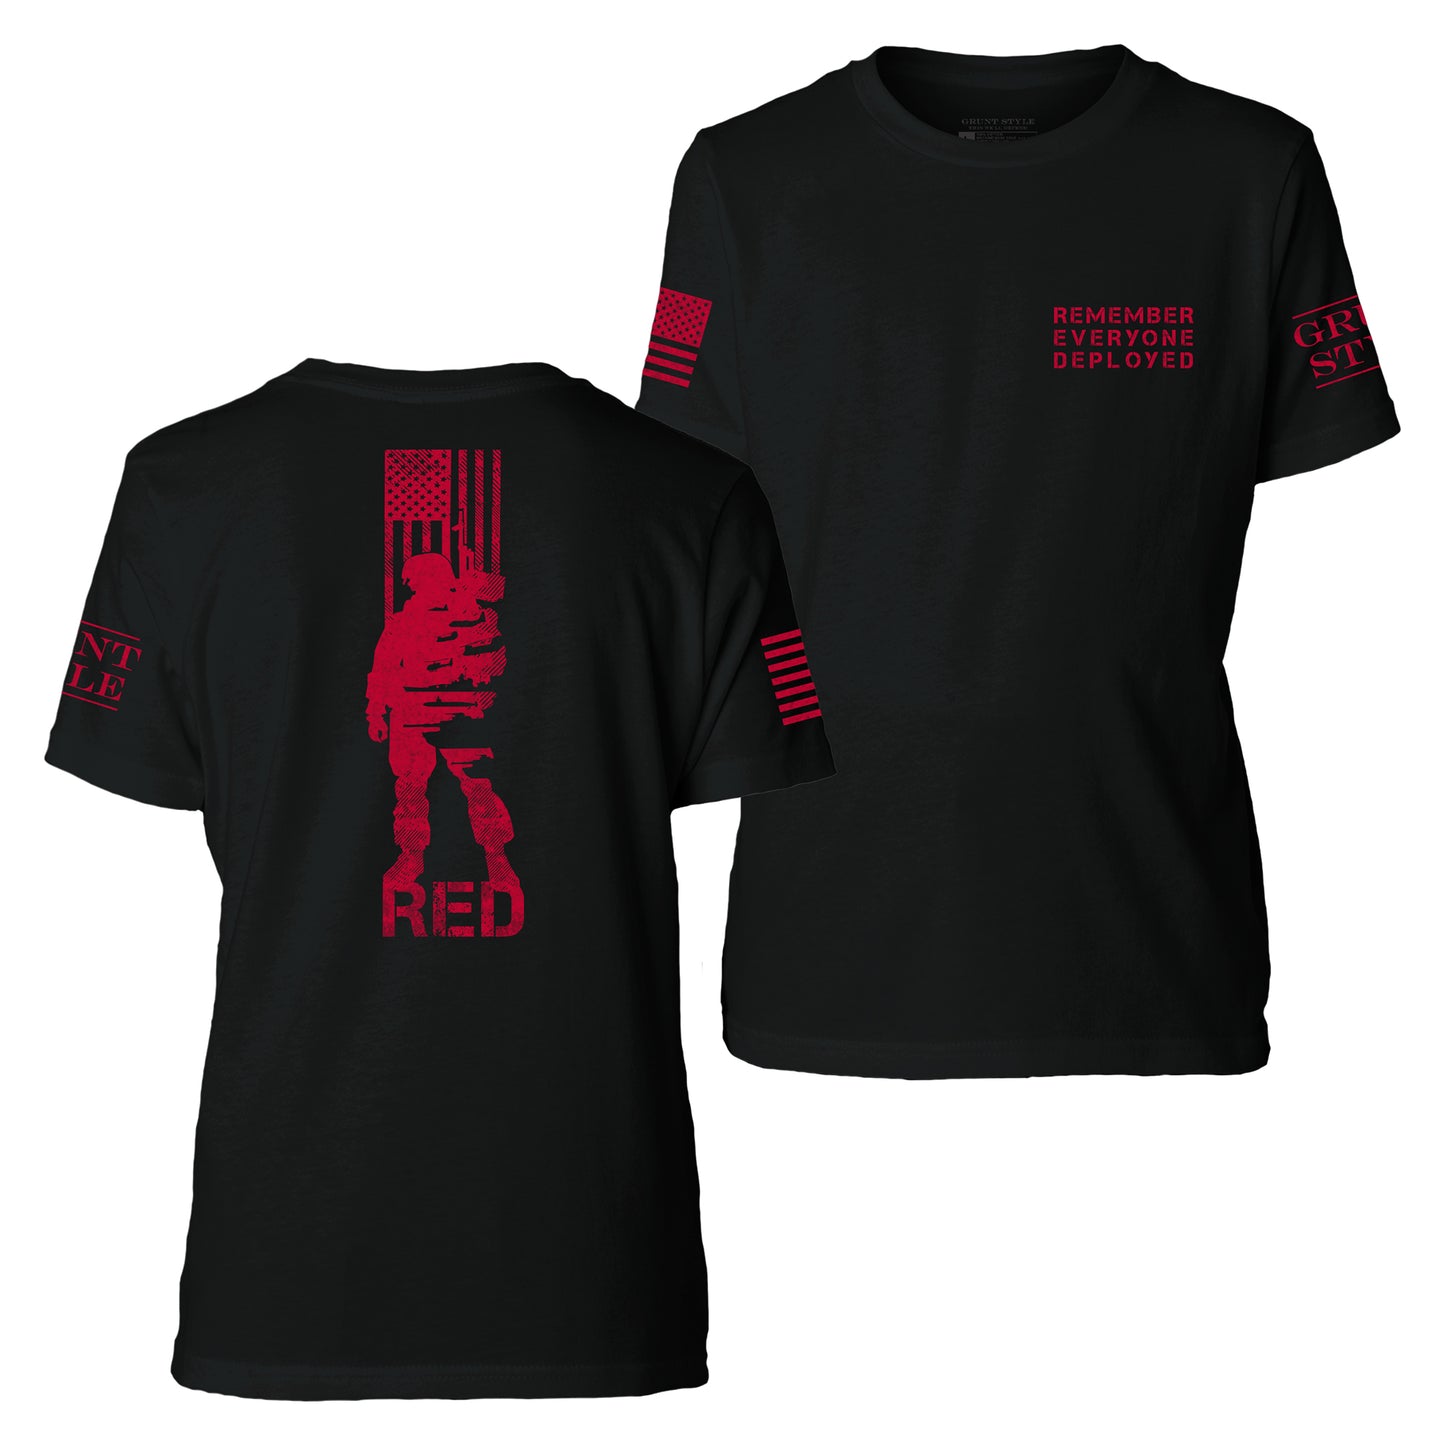 Military Shirt for Kids - Remember Everyone Deployed 